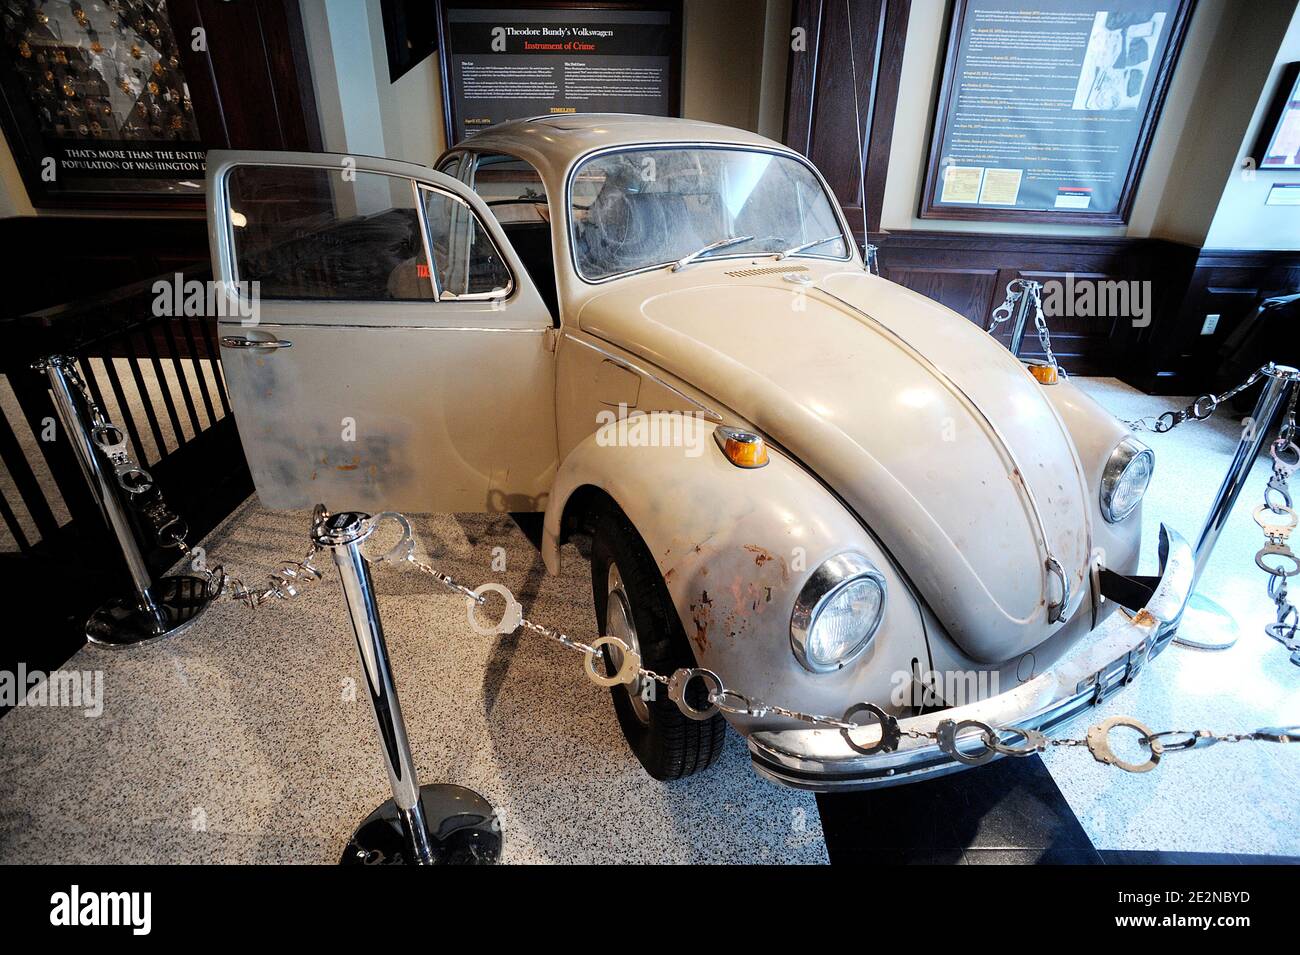 Ted BundyÍs VW Beetle on display at the National Crime and Punishment Museum  on February 22, 2010 in Washington, DC. Bundy's beat up 1968 Volkswagen  Beetle was integral to his serial murders.